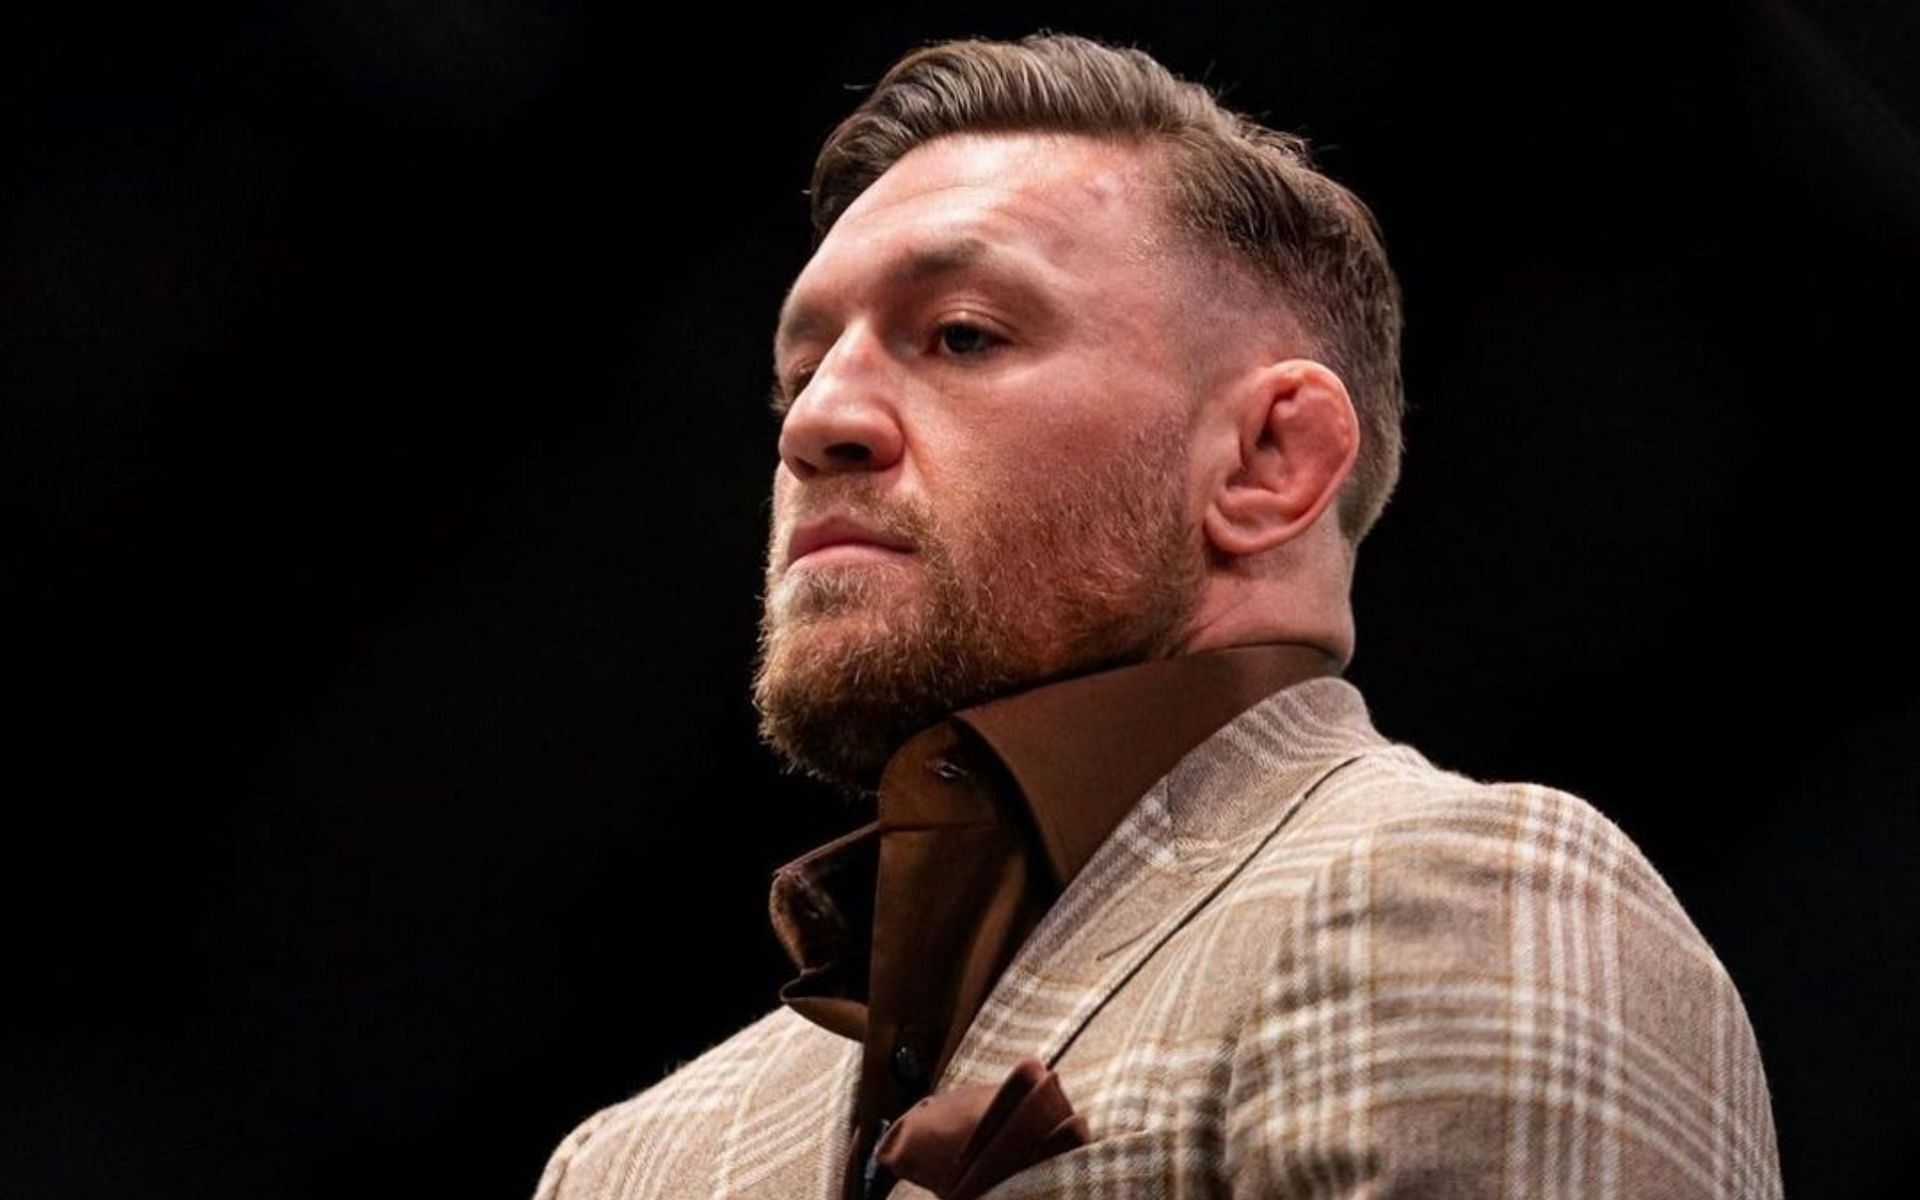 Conor McGregor bulk leads to steroid allegations